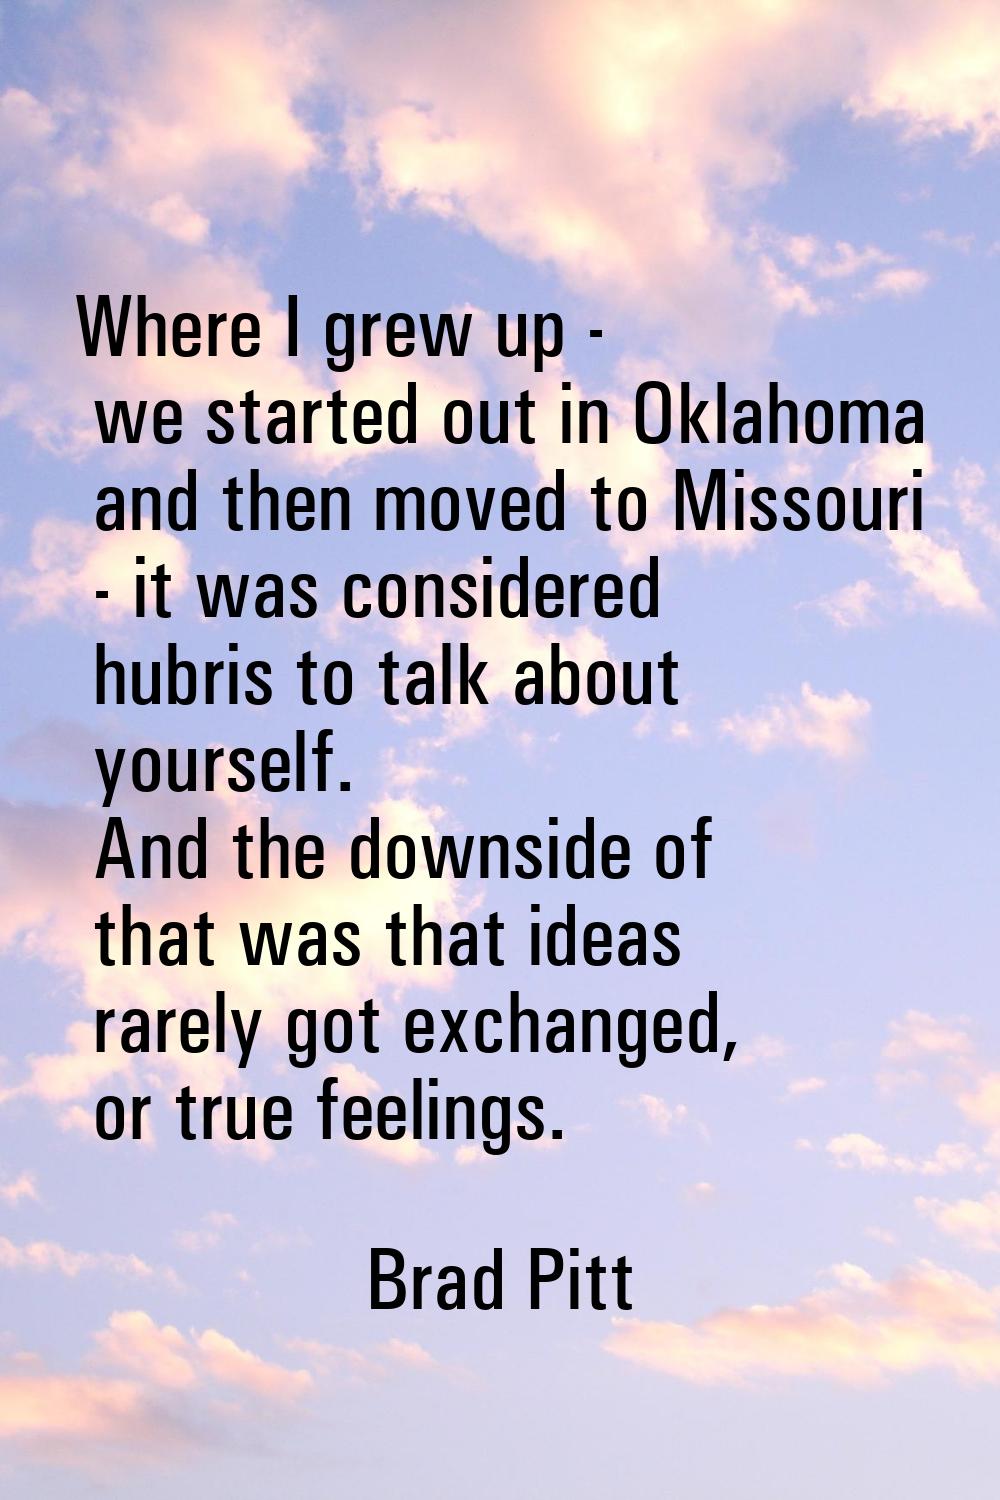 Where I grew up - we started out in Oklahoma and then moved to Missouri - it was considered hubris 